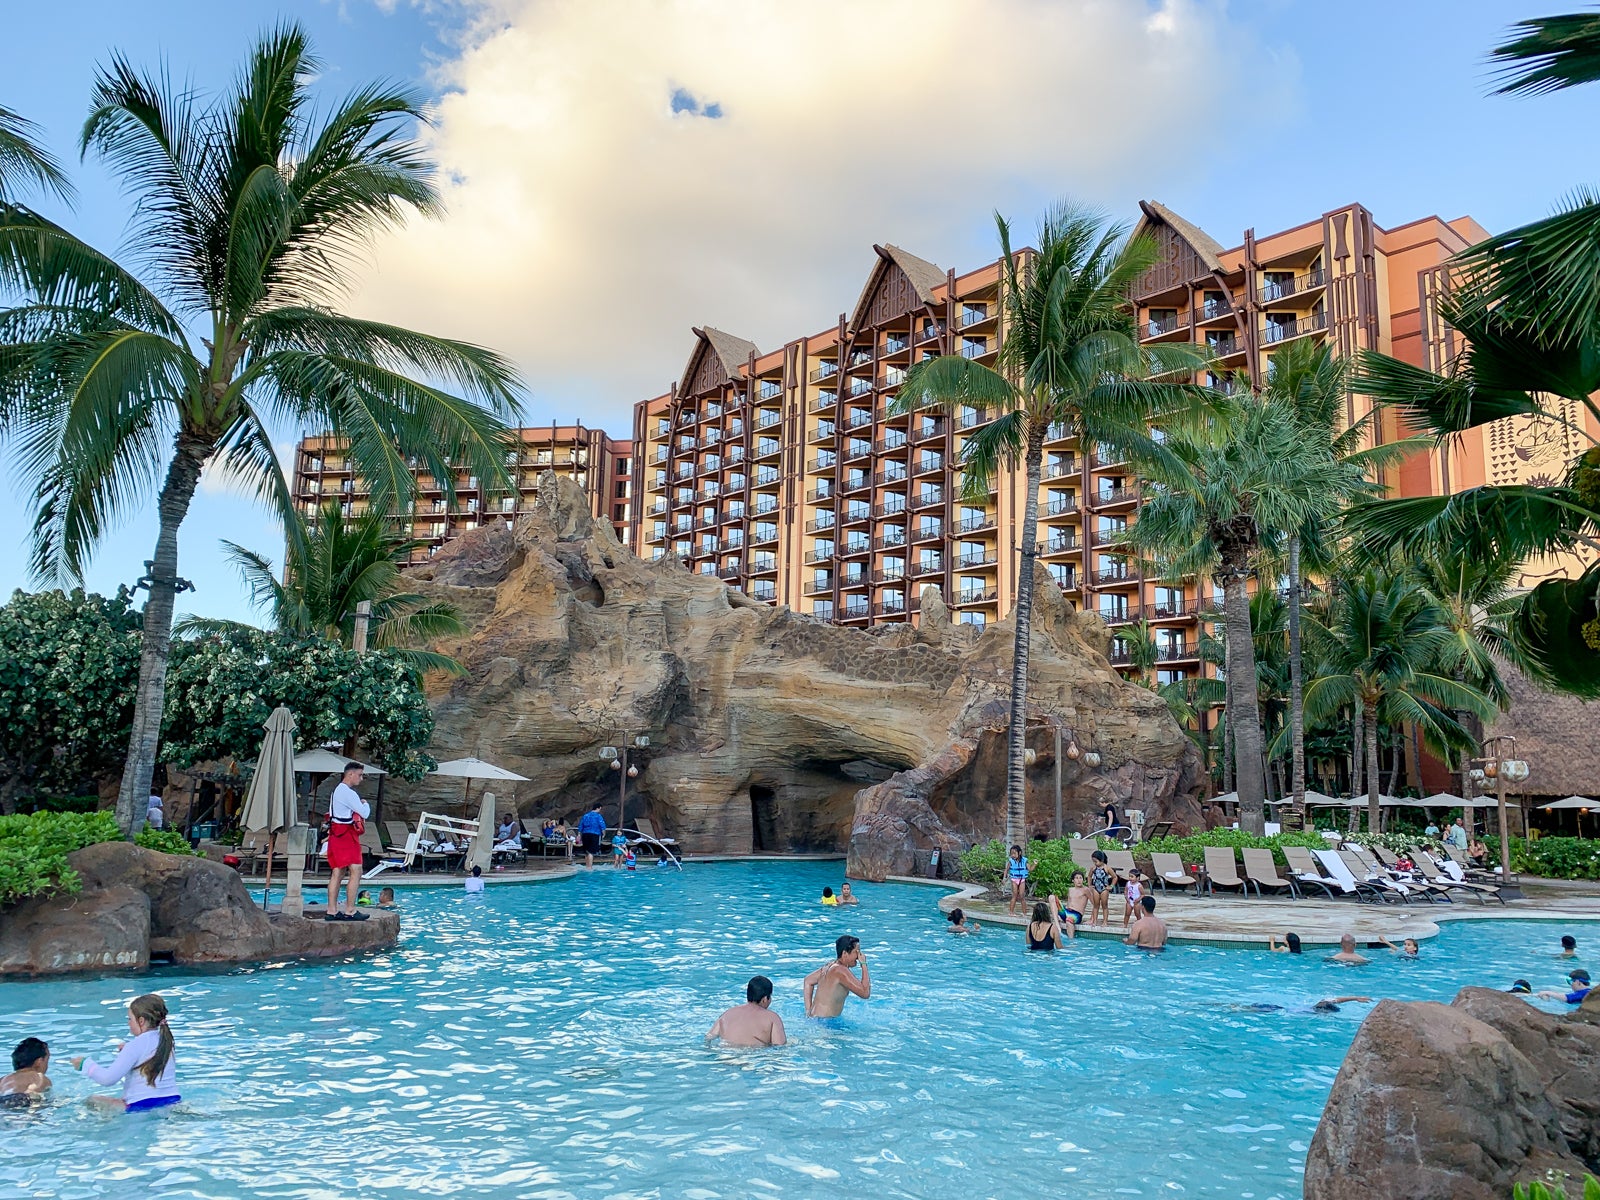 Disney's take on timeshares: Guide to Disney Vacation Club - The Points Guy